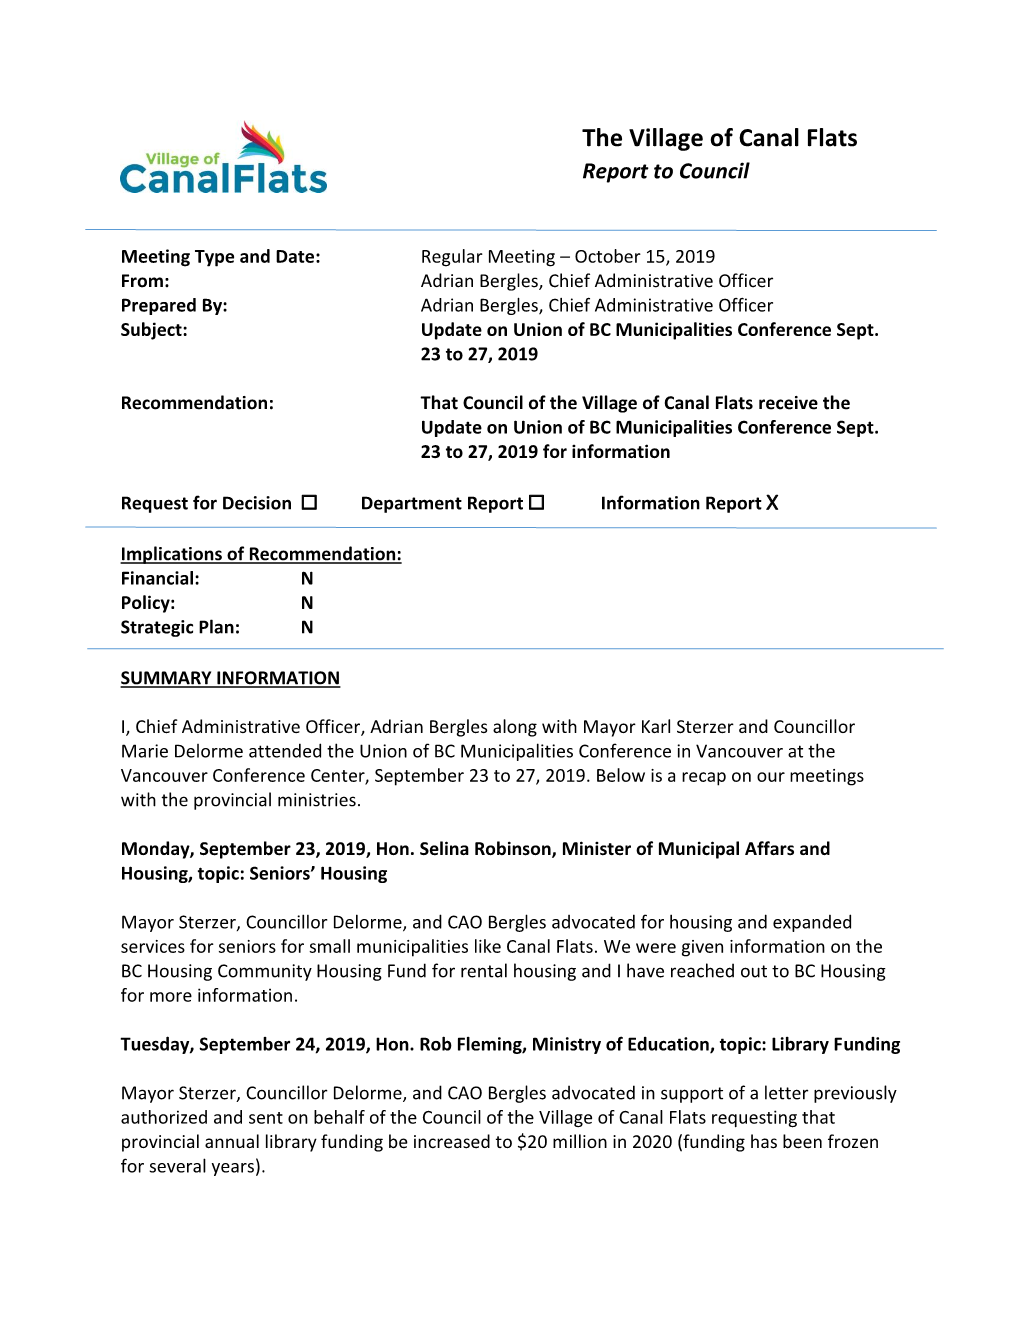 The Village of Canal Flats Report to Council